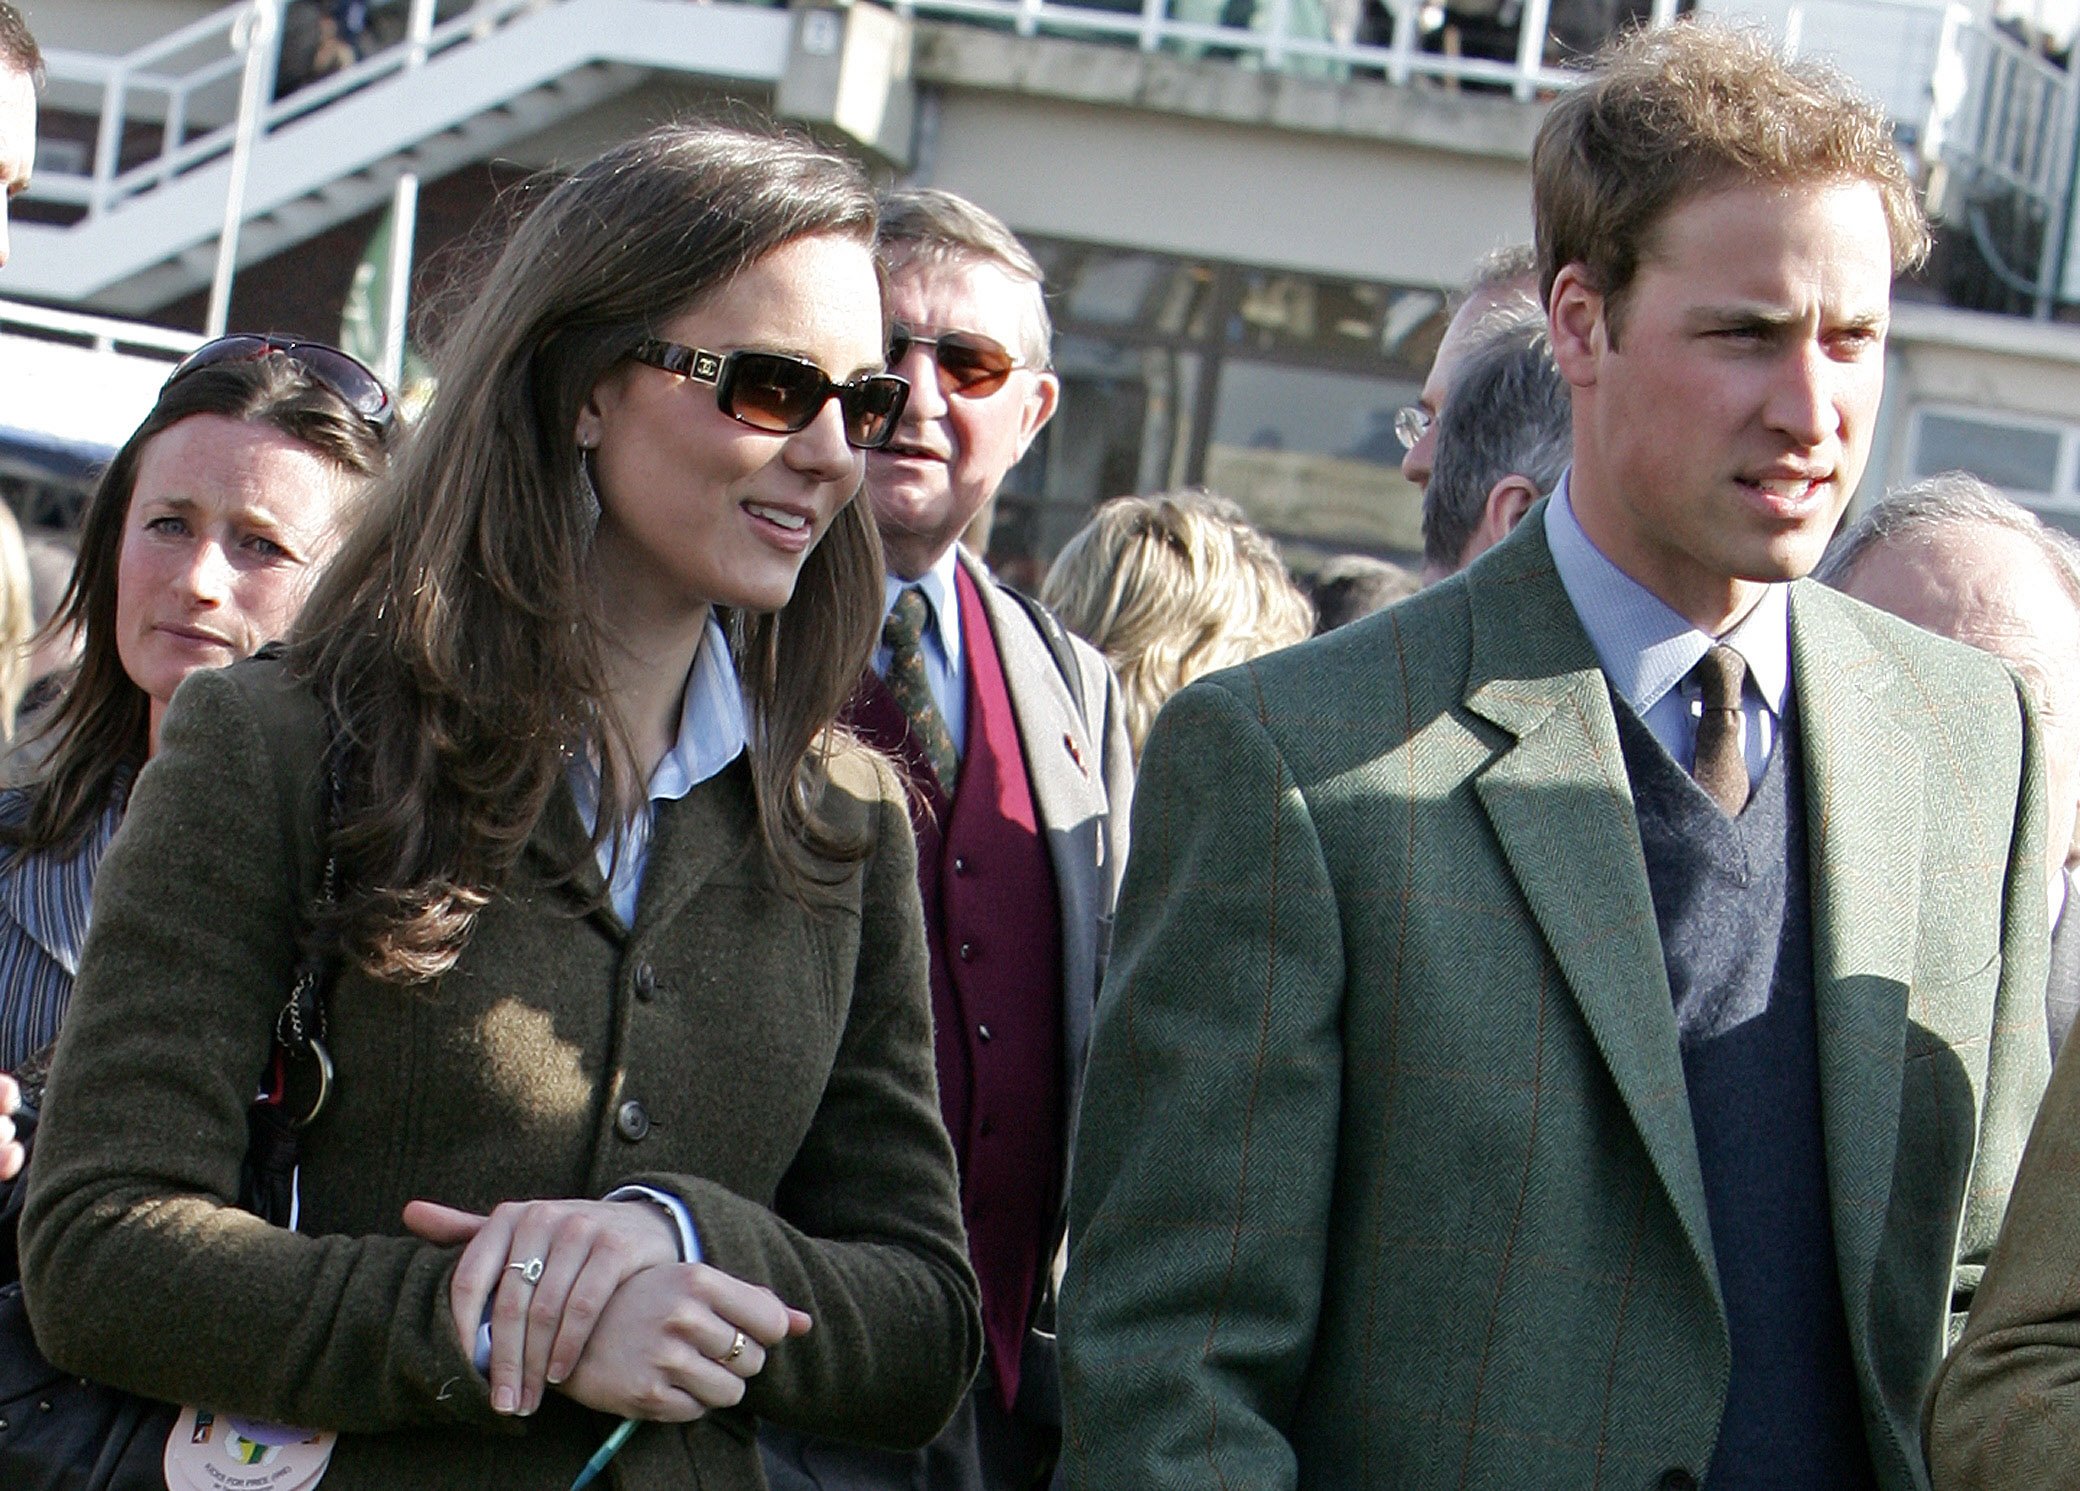 Kate Middleton and Prince William in the paddock enclosure on the first day of the Cheltenham Race Festival in Gloucestershire on March 13, 2007. | Source: Getty Images